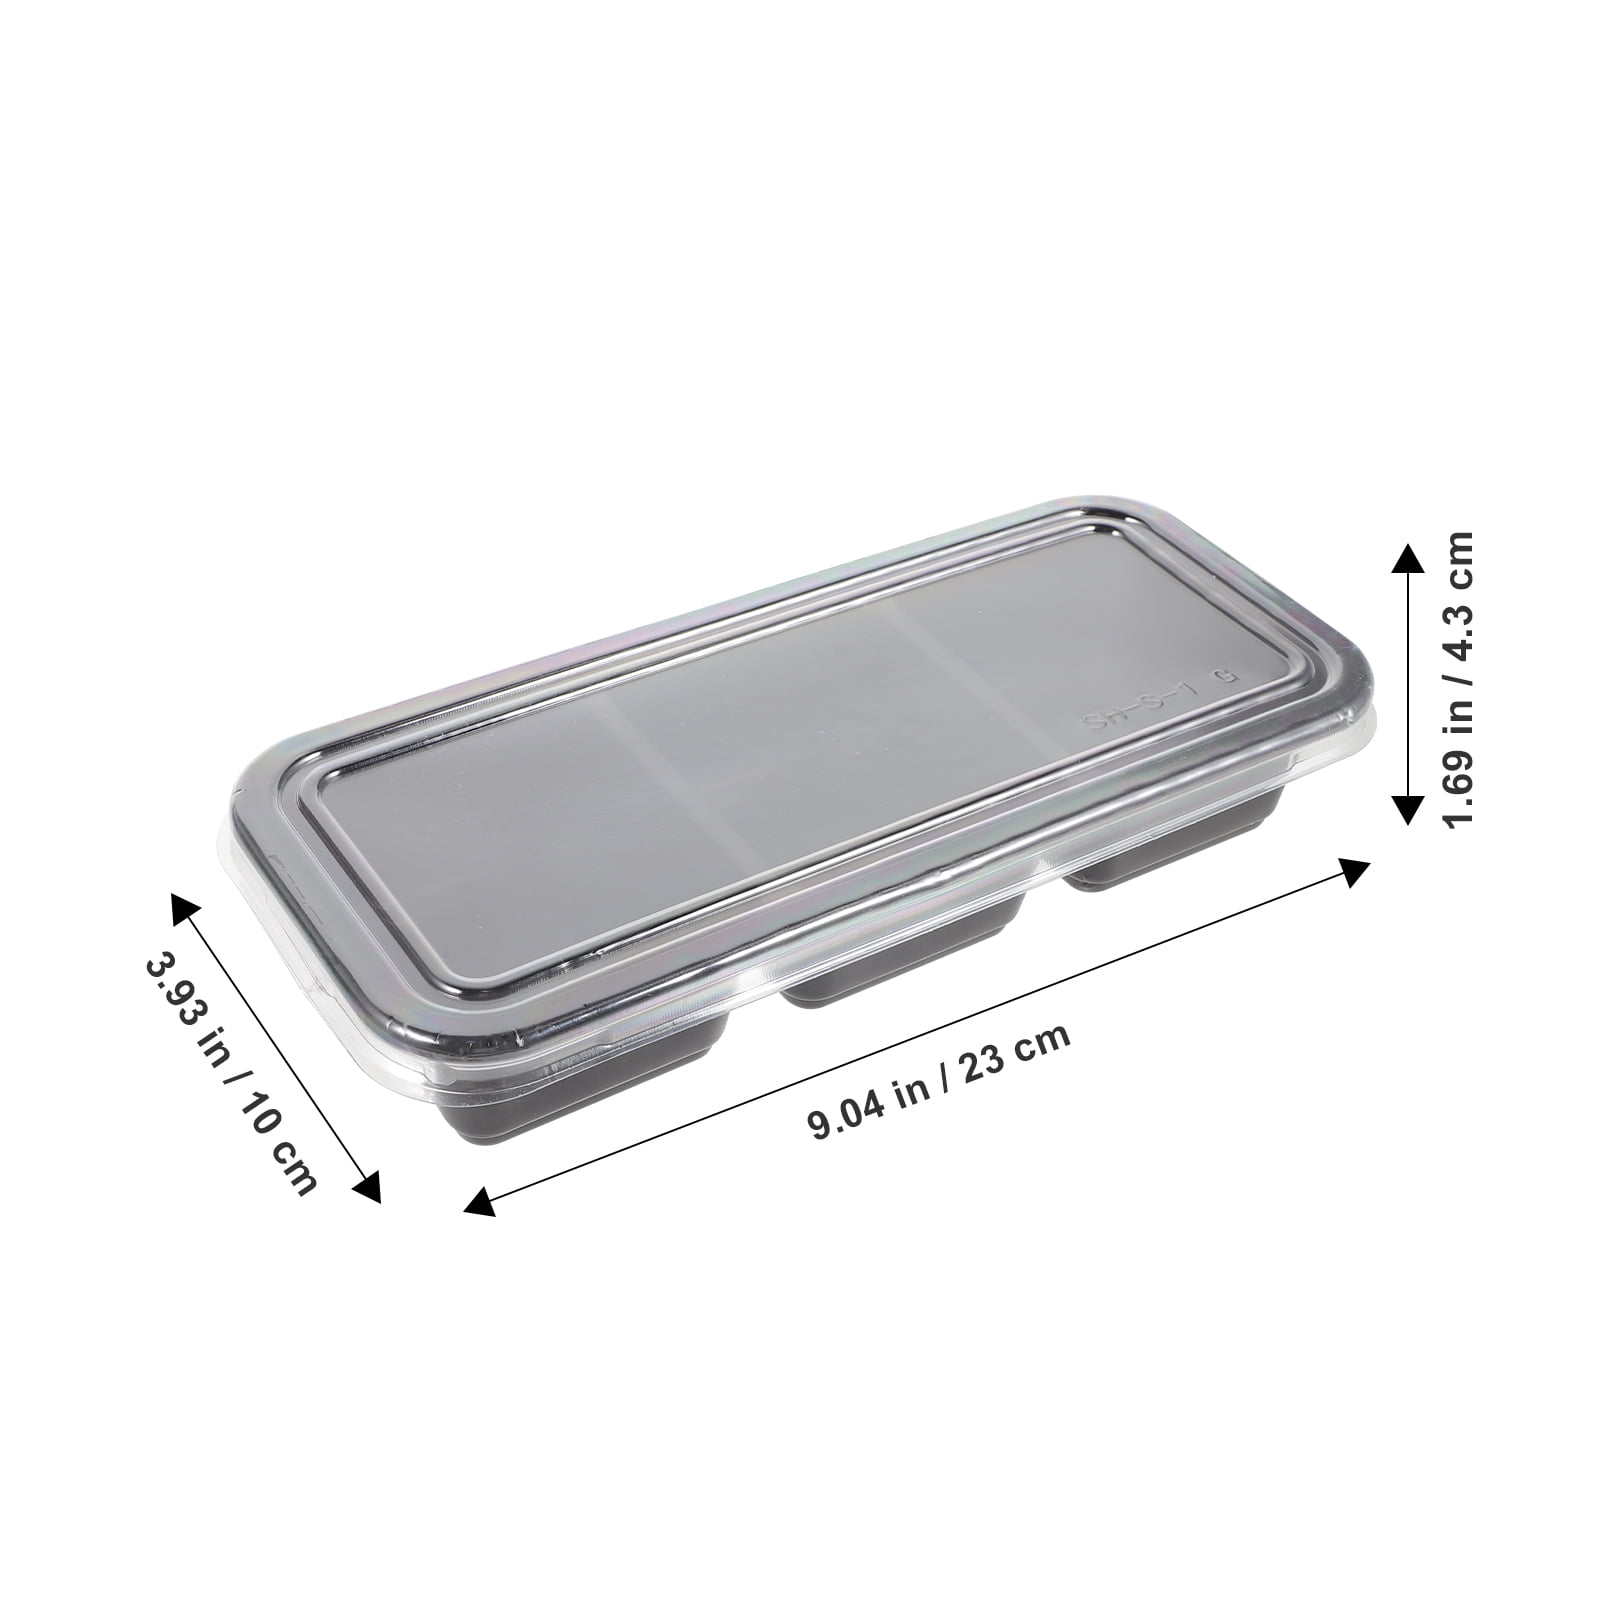 TAKENAKA Bento Nibble Box, Eco-Friendly Lunch Box Made in Japan, BPA and Reed Free, 100% Recycle Plastic Bottle Use, Microwave and Dis